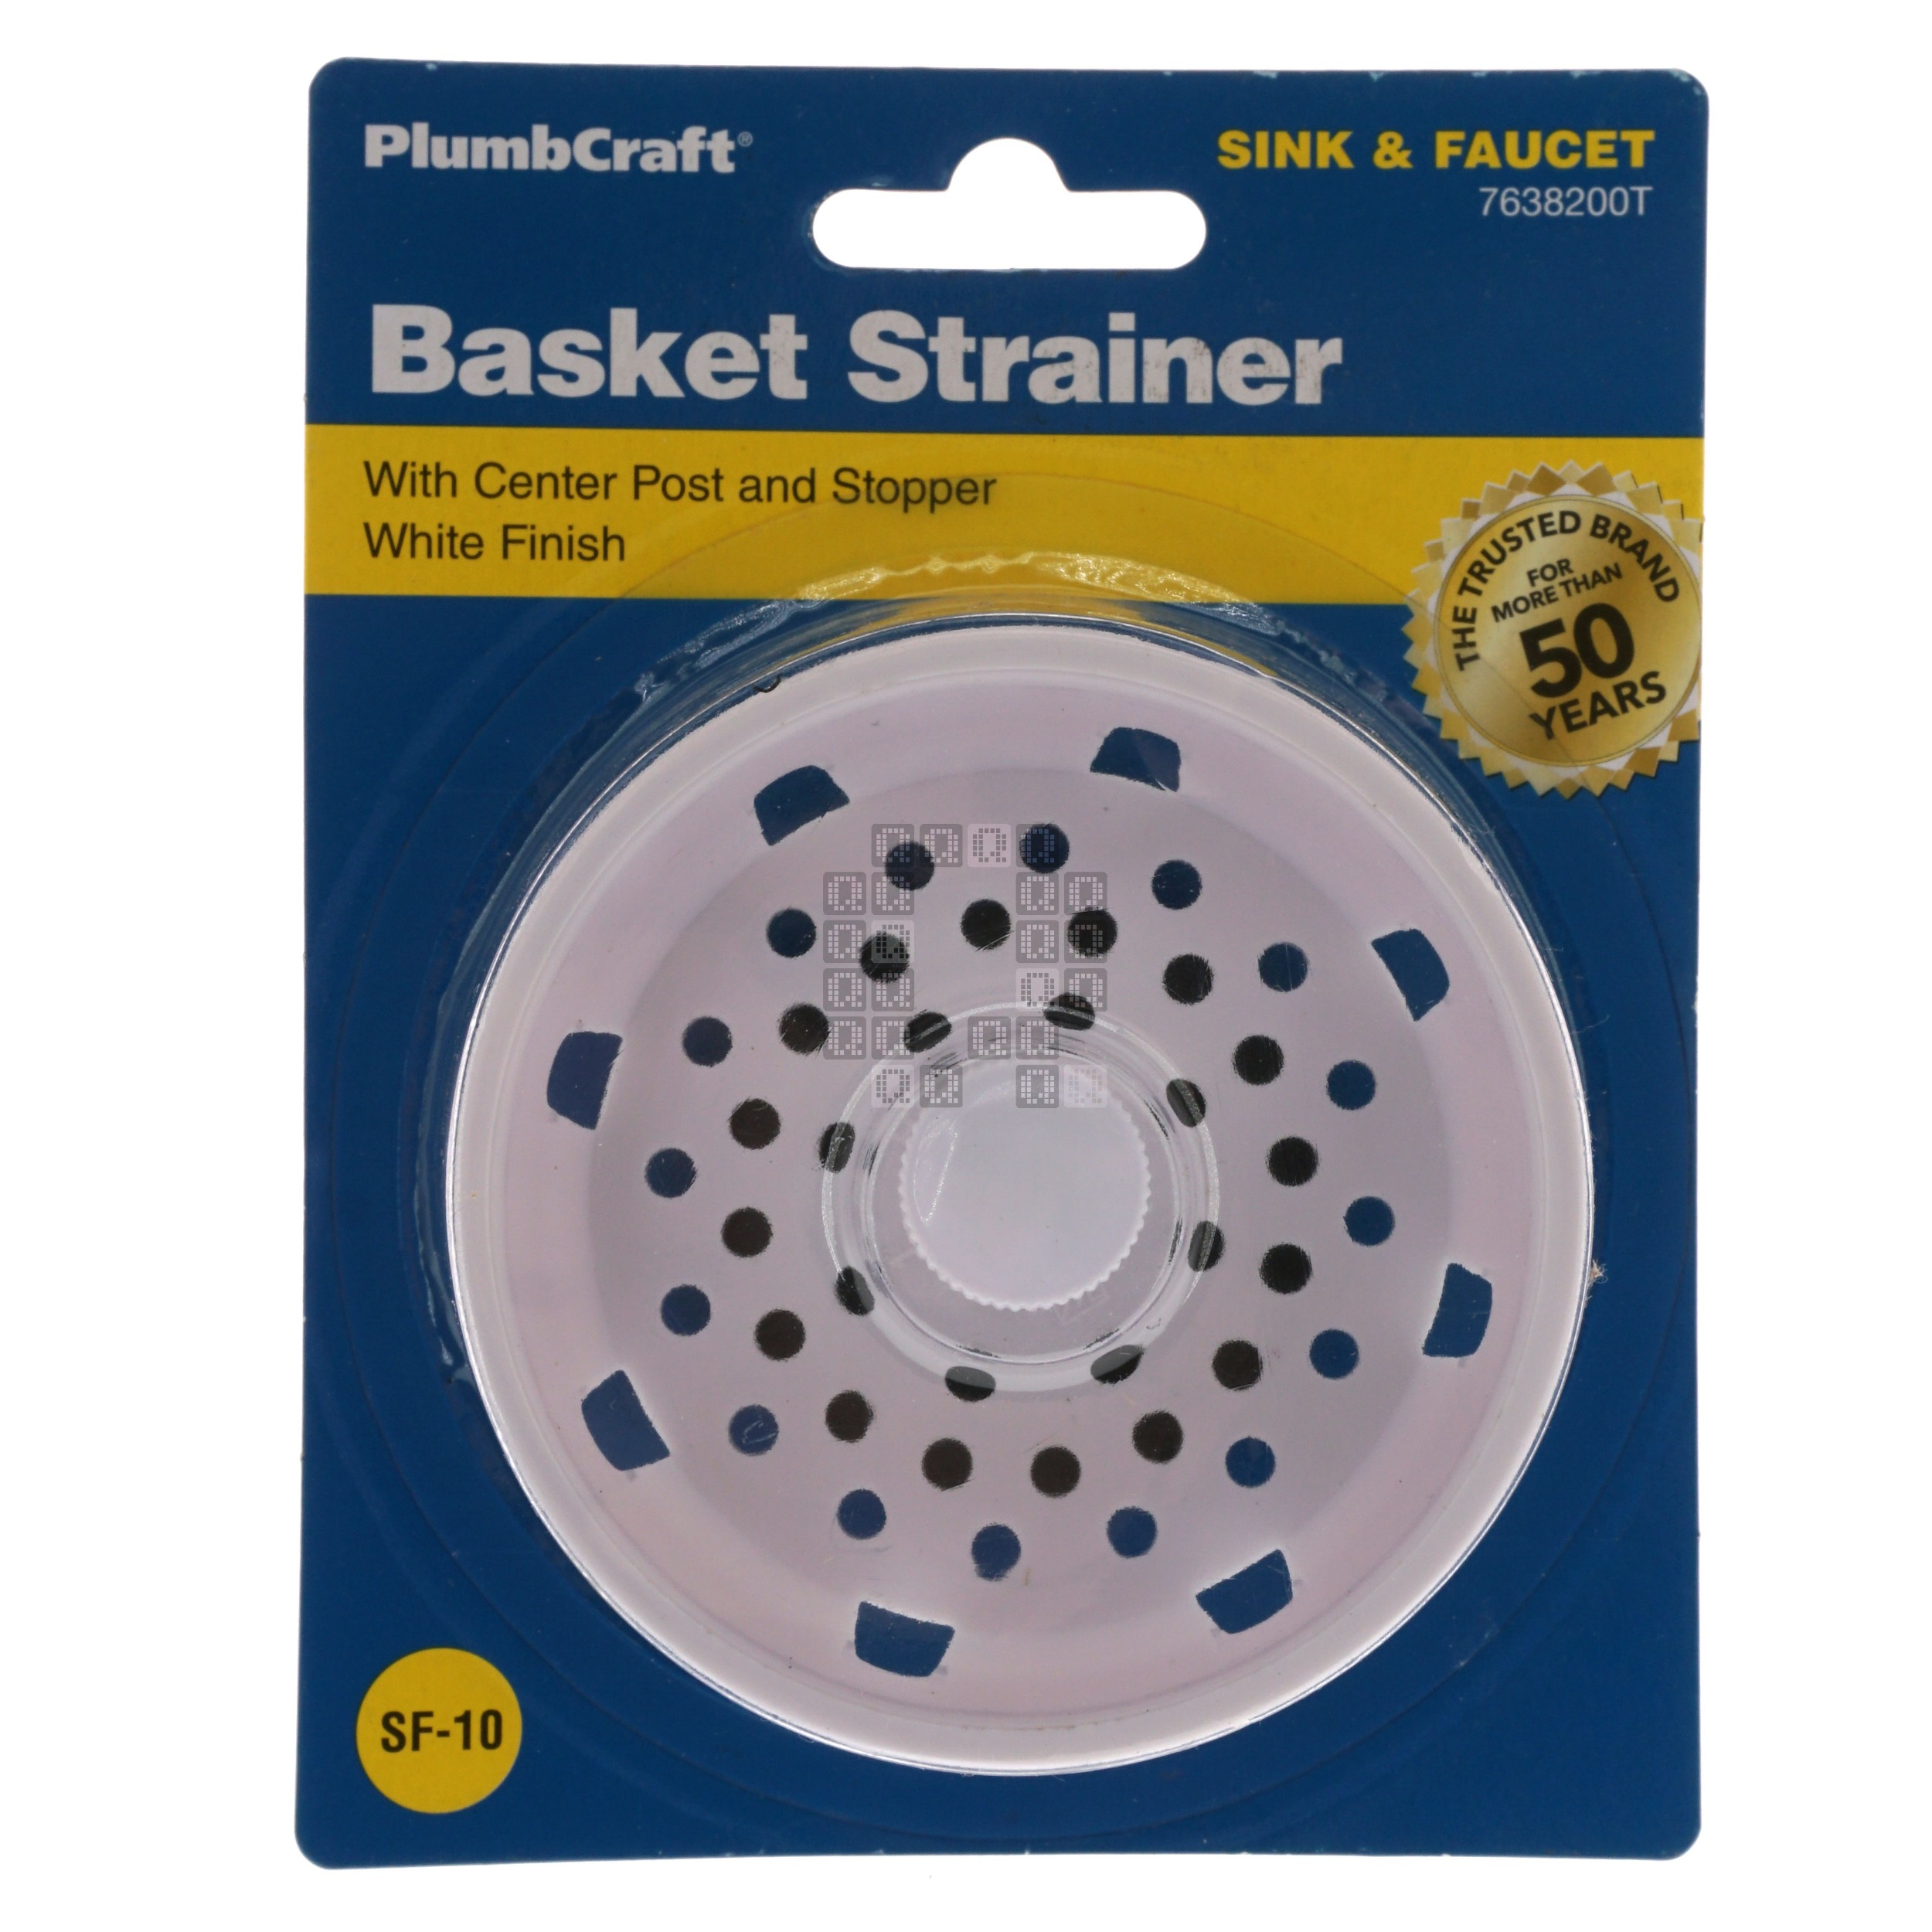 PlumbCraft 7638200T Plastic Basket Strainer with Center Post and Stopper, White Finish